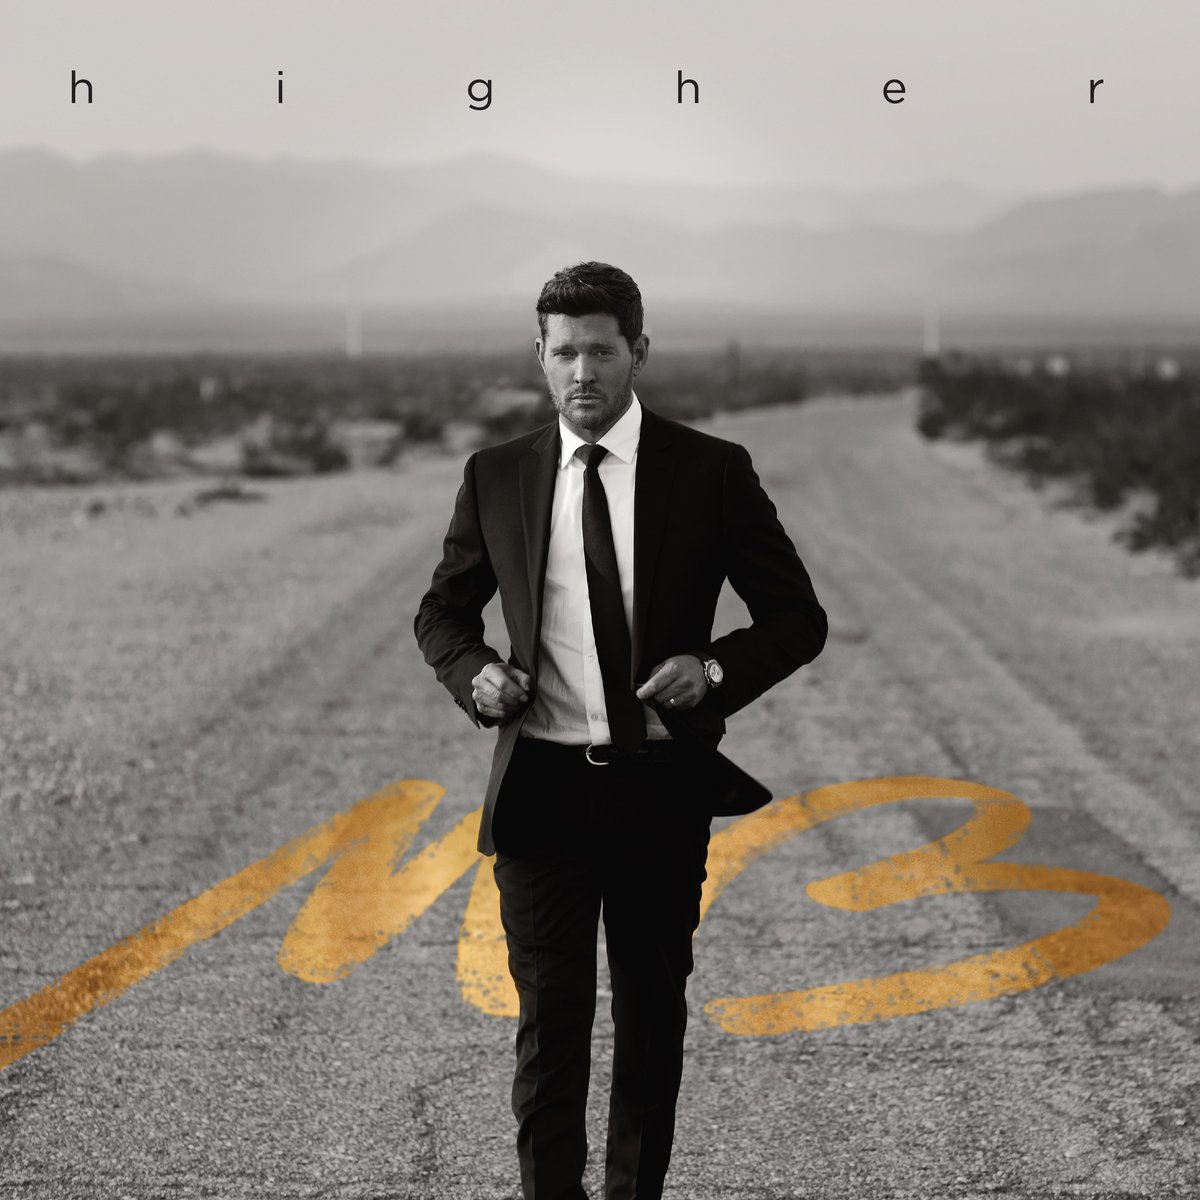 Buble Michael - Higher